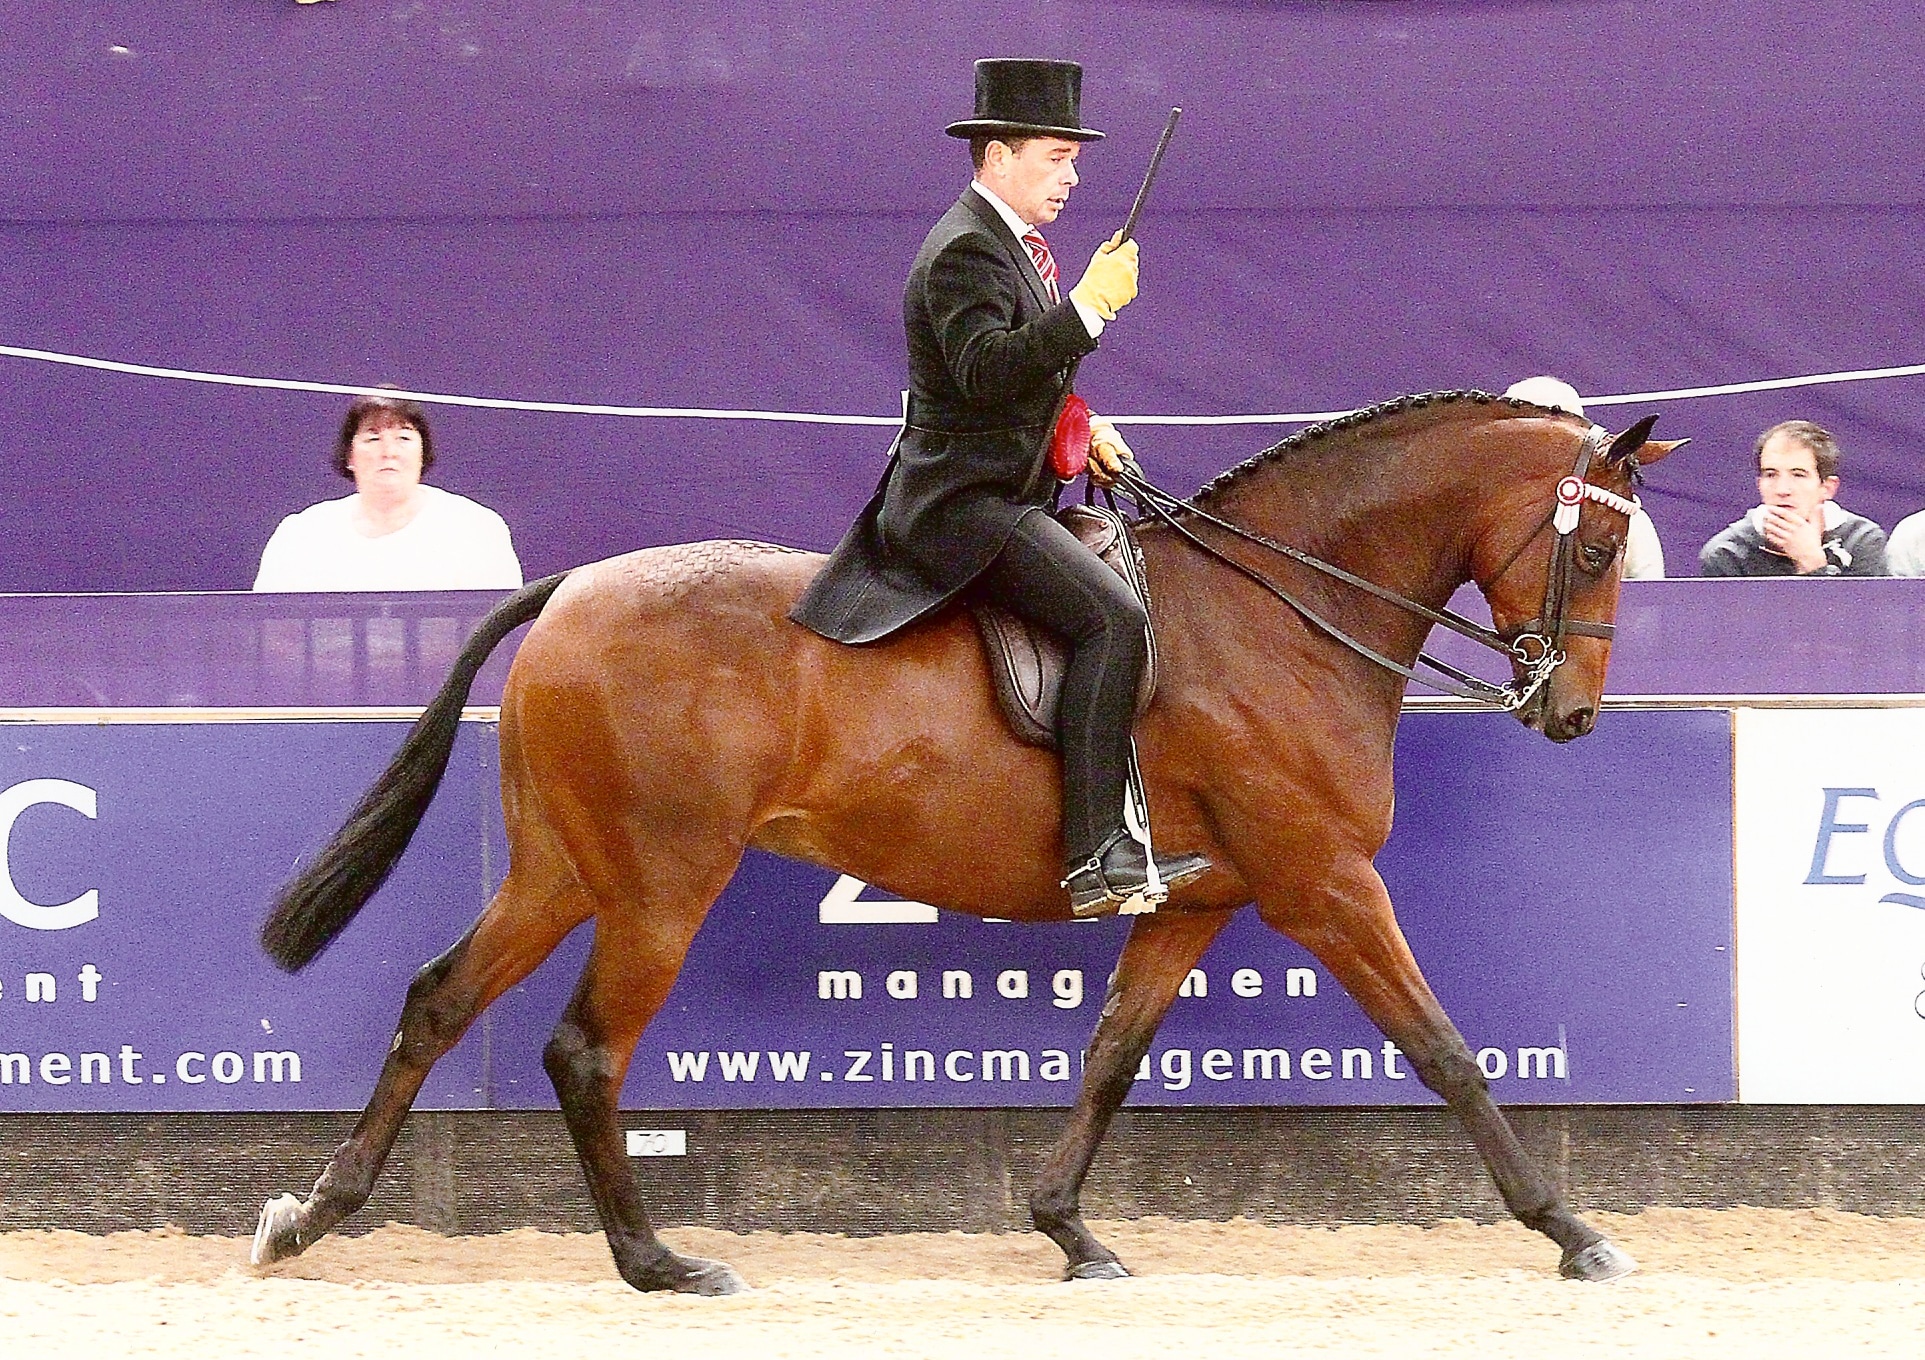 Small Hack of the Year Royal Engagement ridden by Robert Walker and owned by Mrs Lucy Smith Crallan